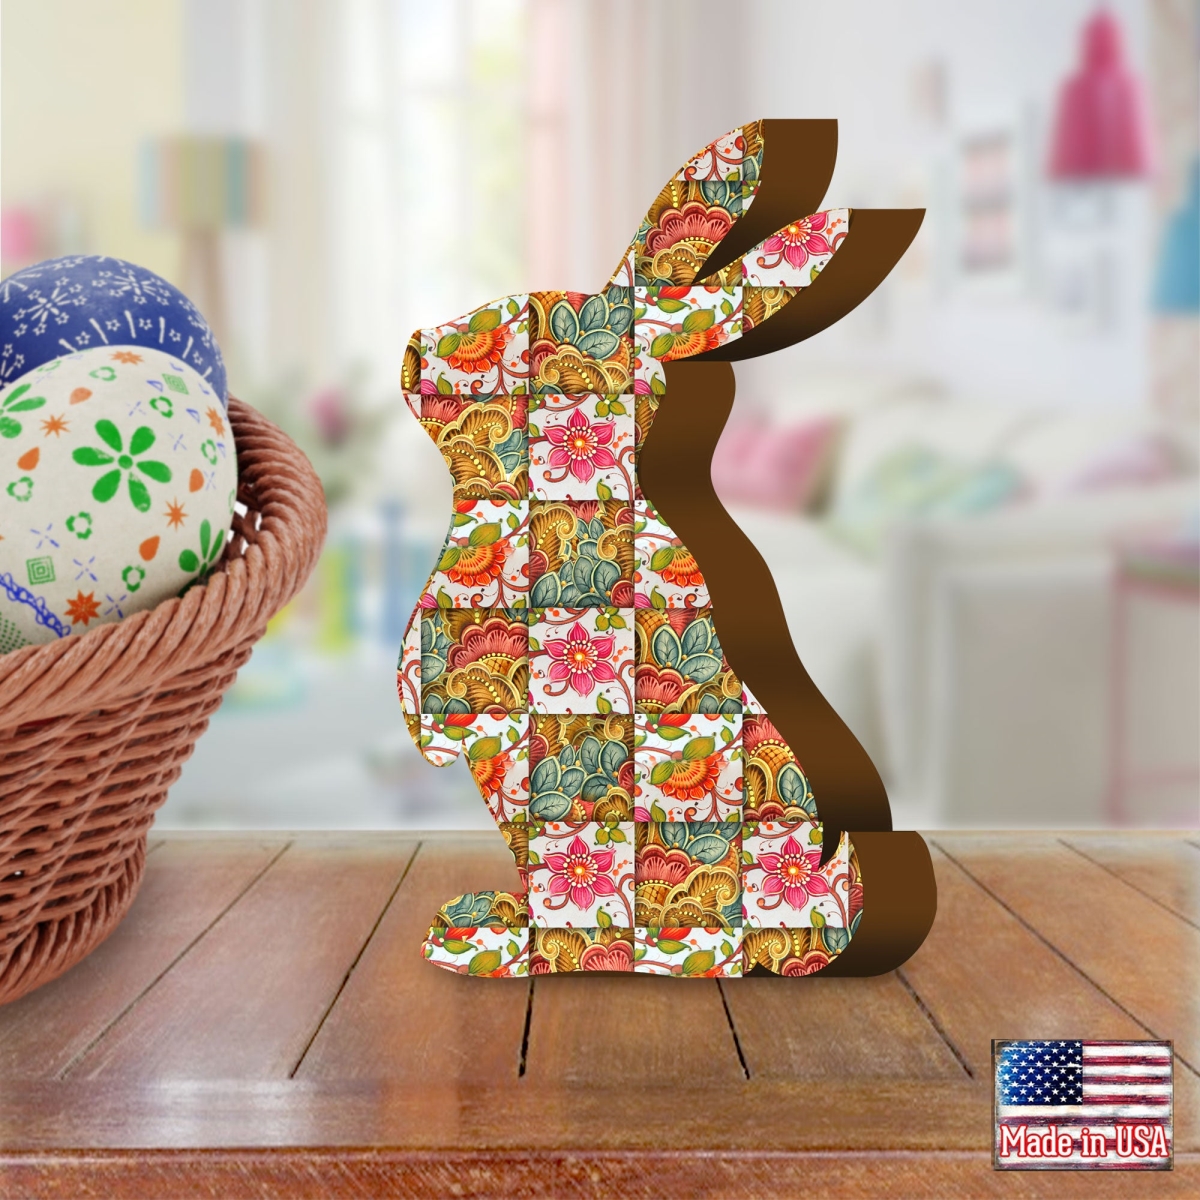 Picture of Designocracy 8154424S 5.5 x 3 in. Quilted Flower Bunny Decorative Figurine